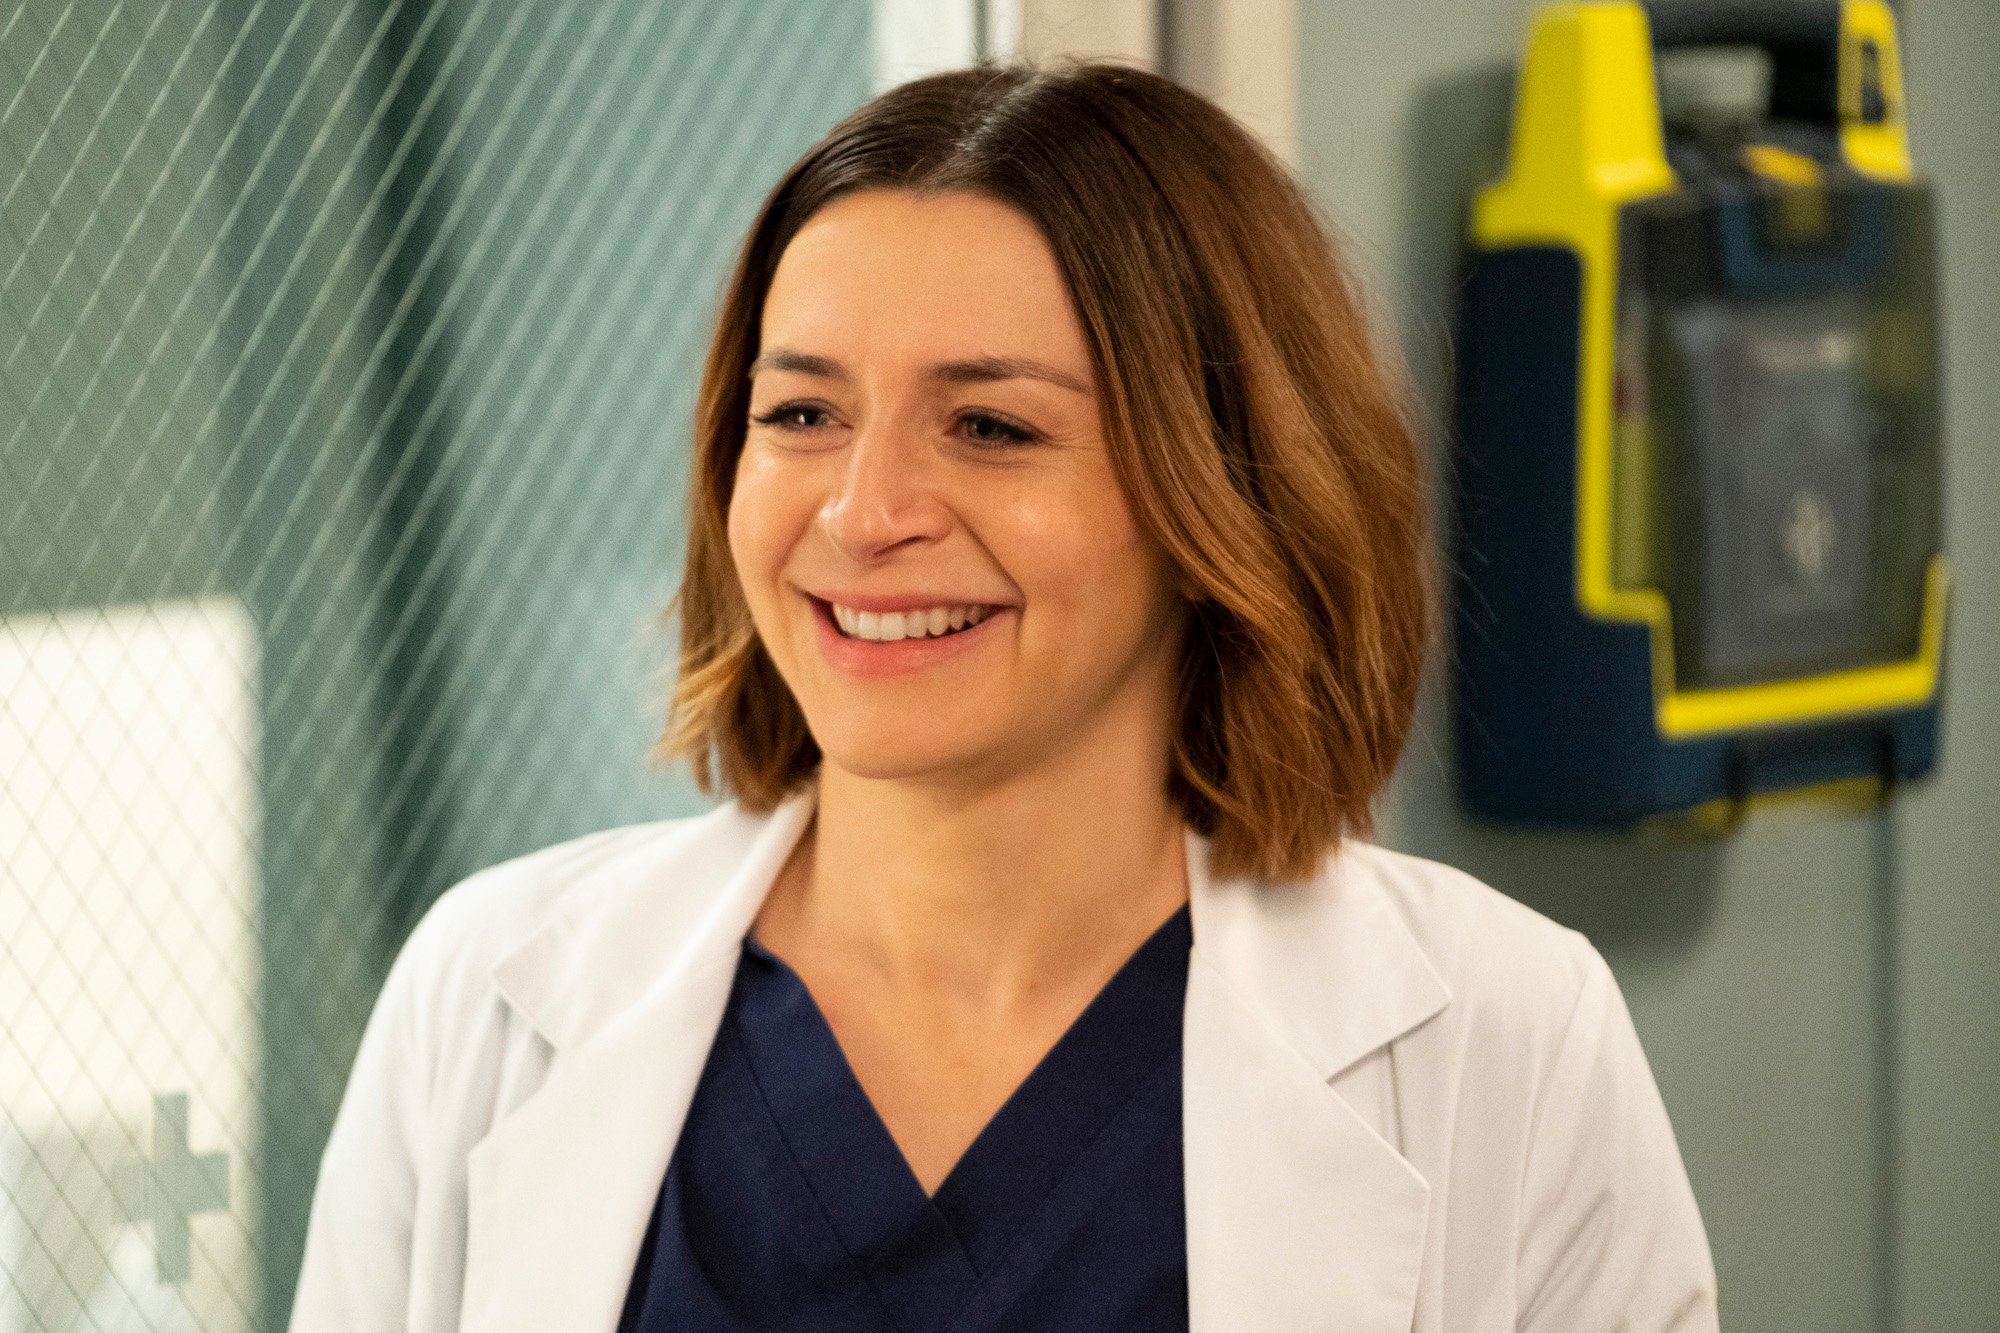 ‘Grey’s Anatomy’: Amelia Has Become a Fan-Favorite: ‘Every Minute With Her on Screen Is Just Magic’